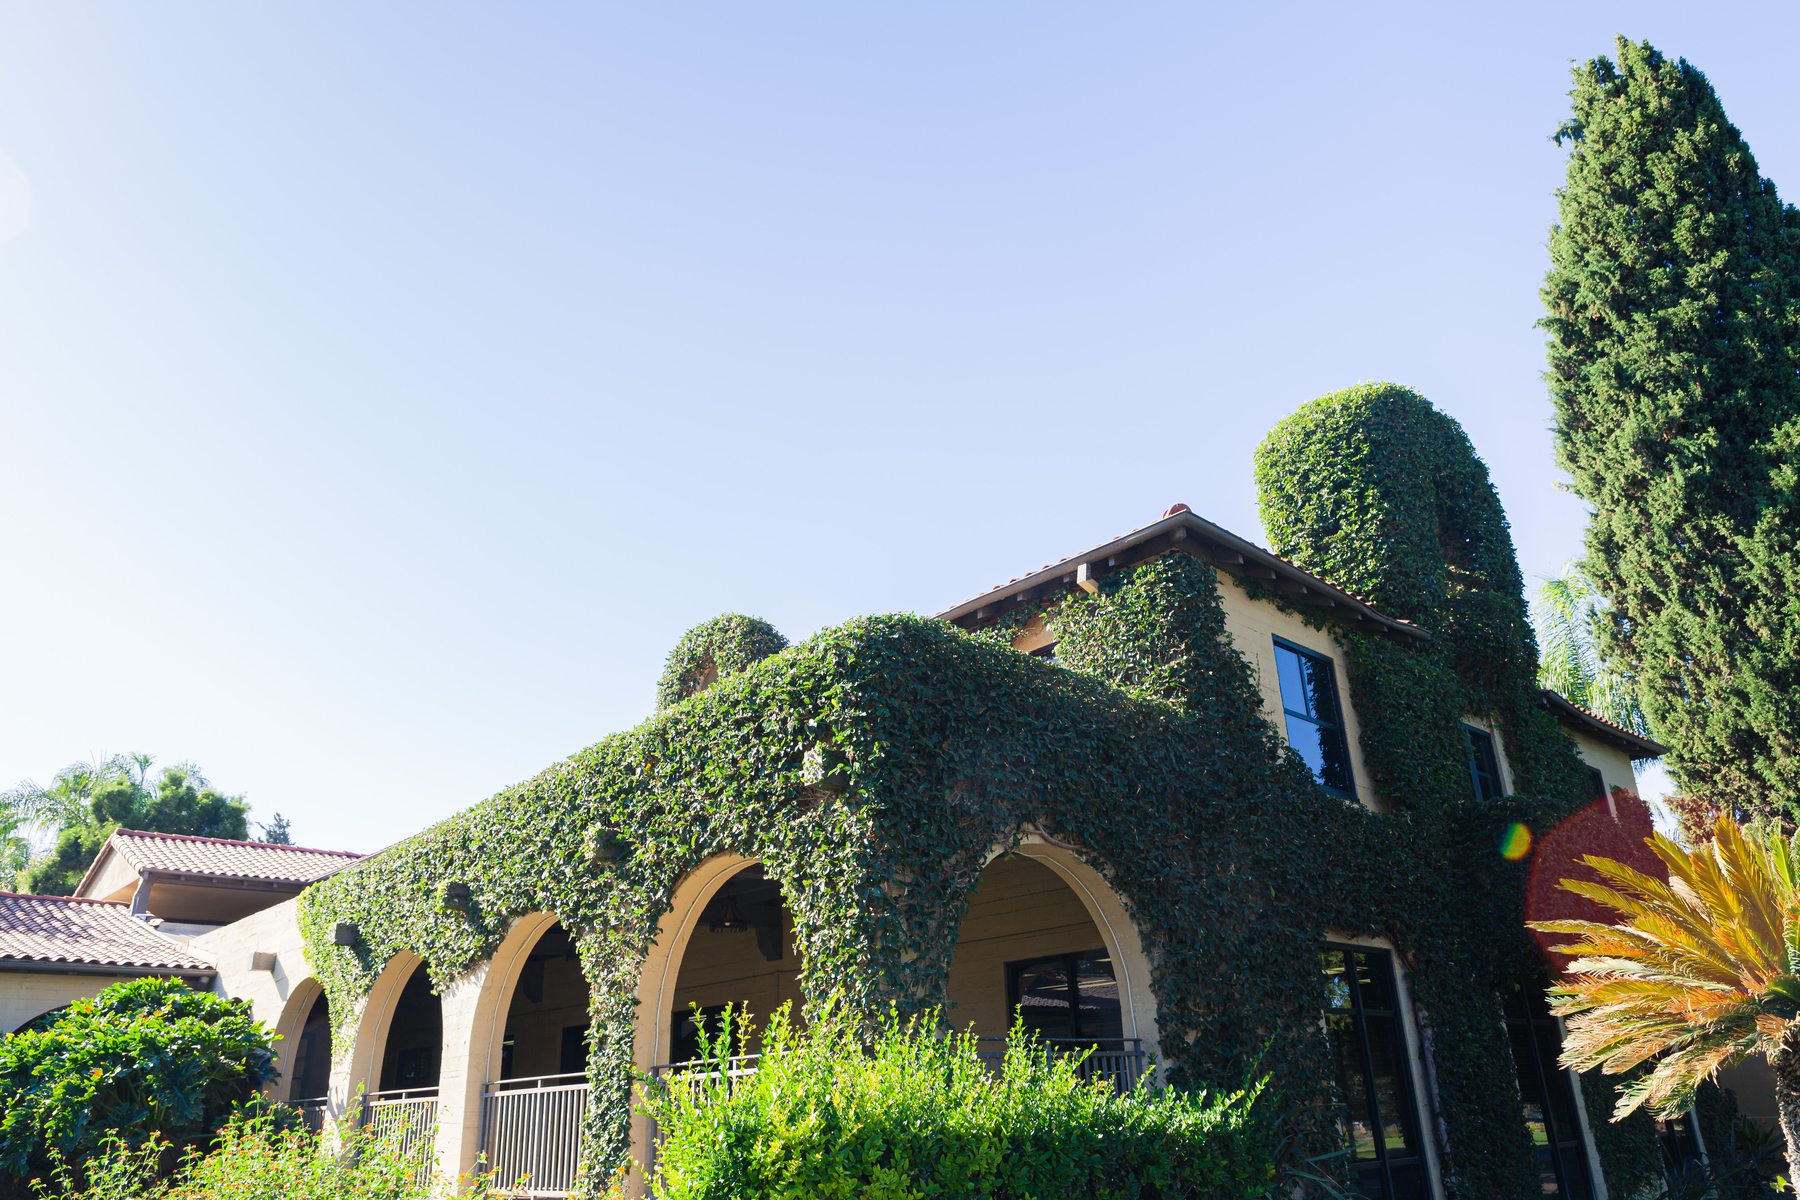 Exterior of CBU campus building covered in ivy